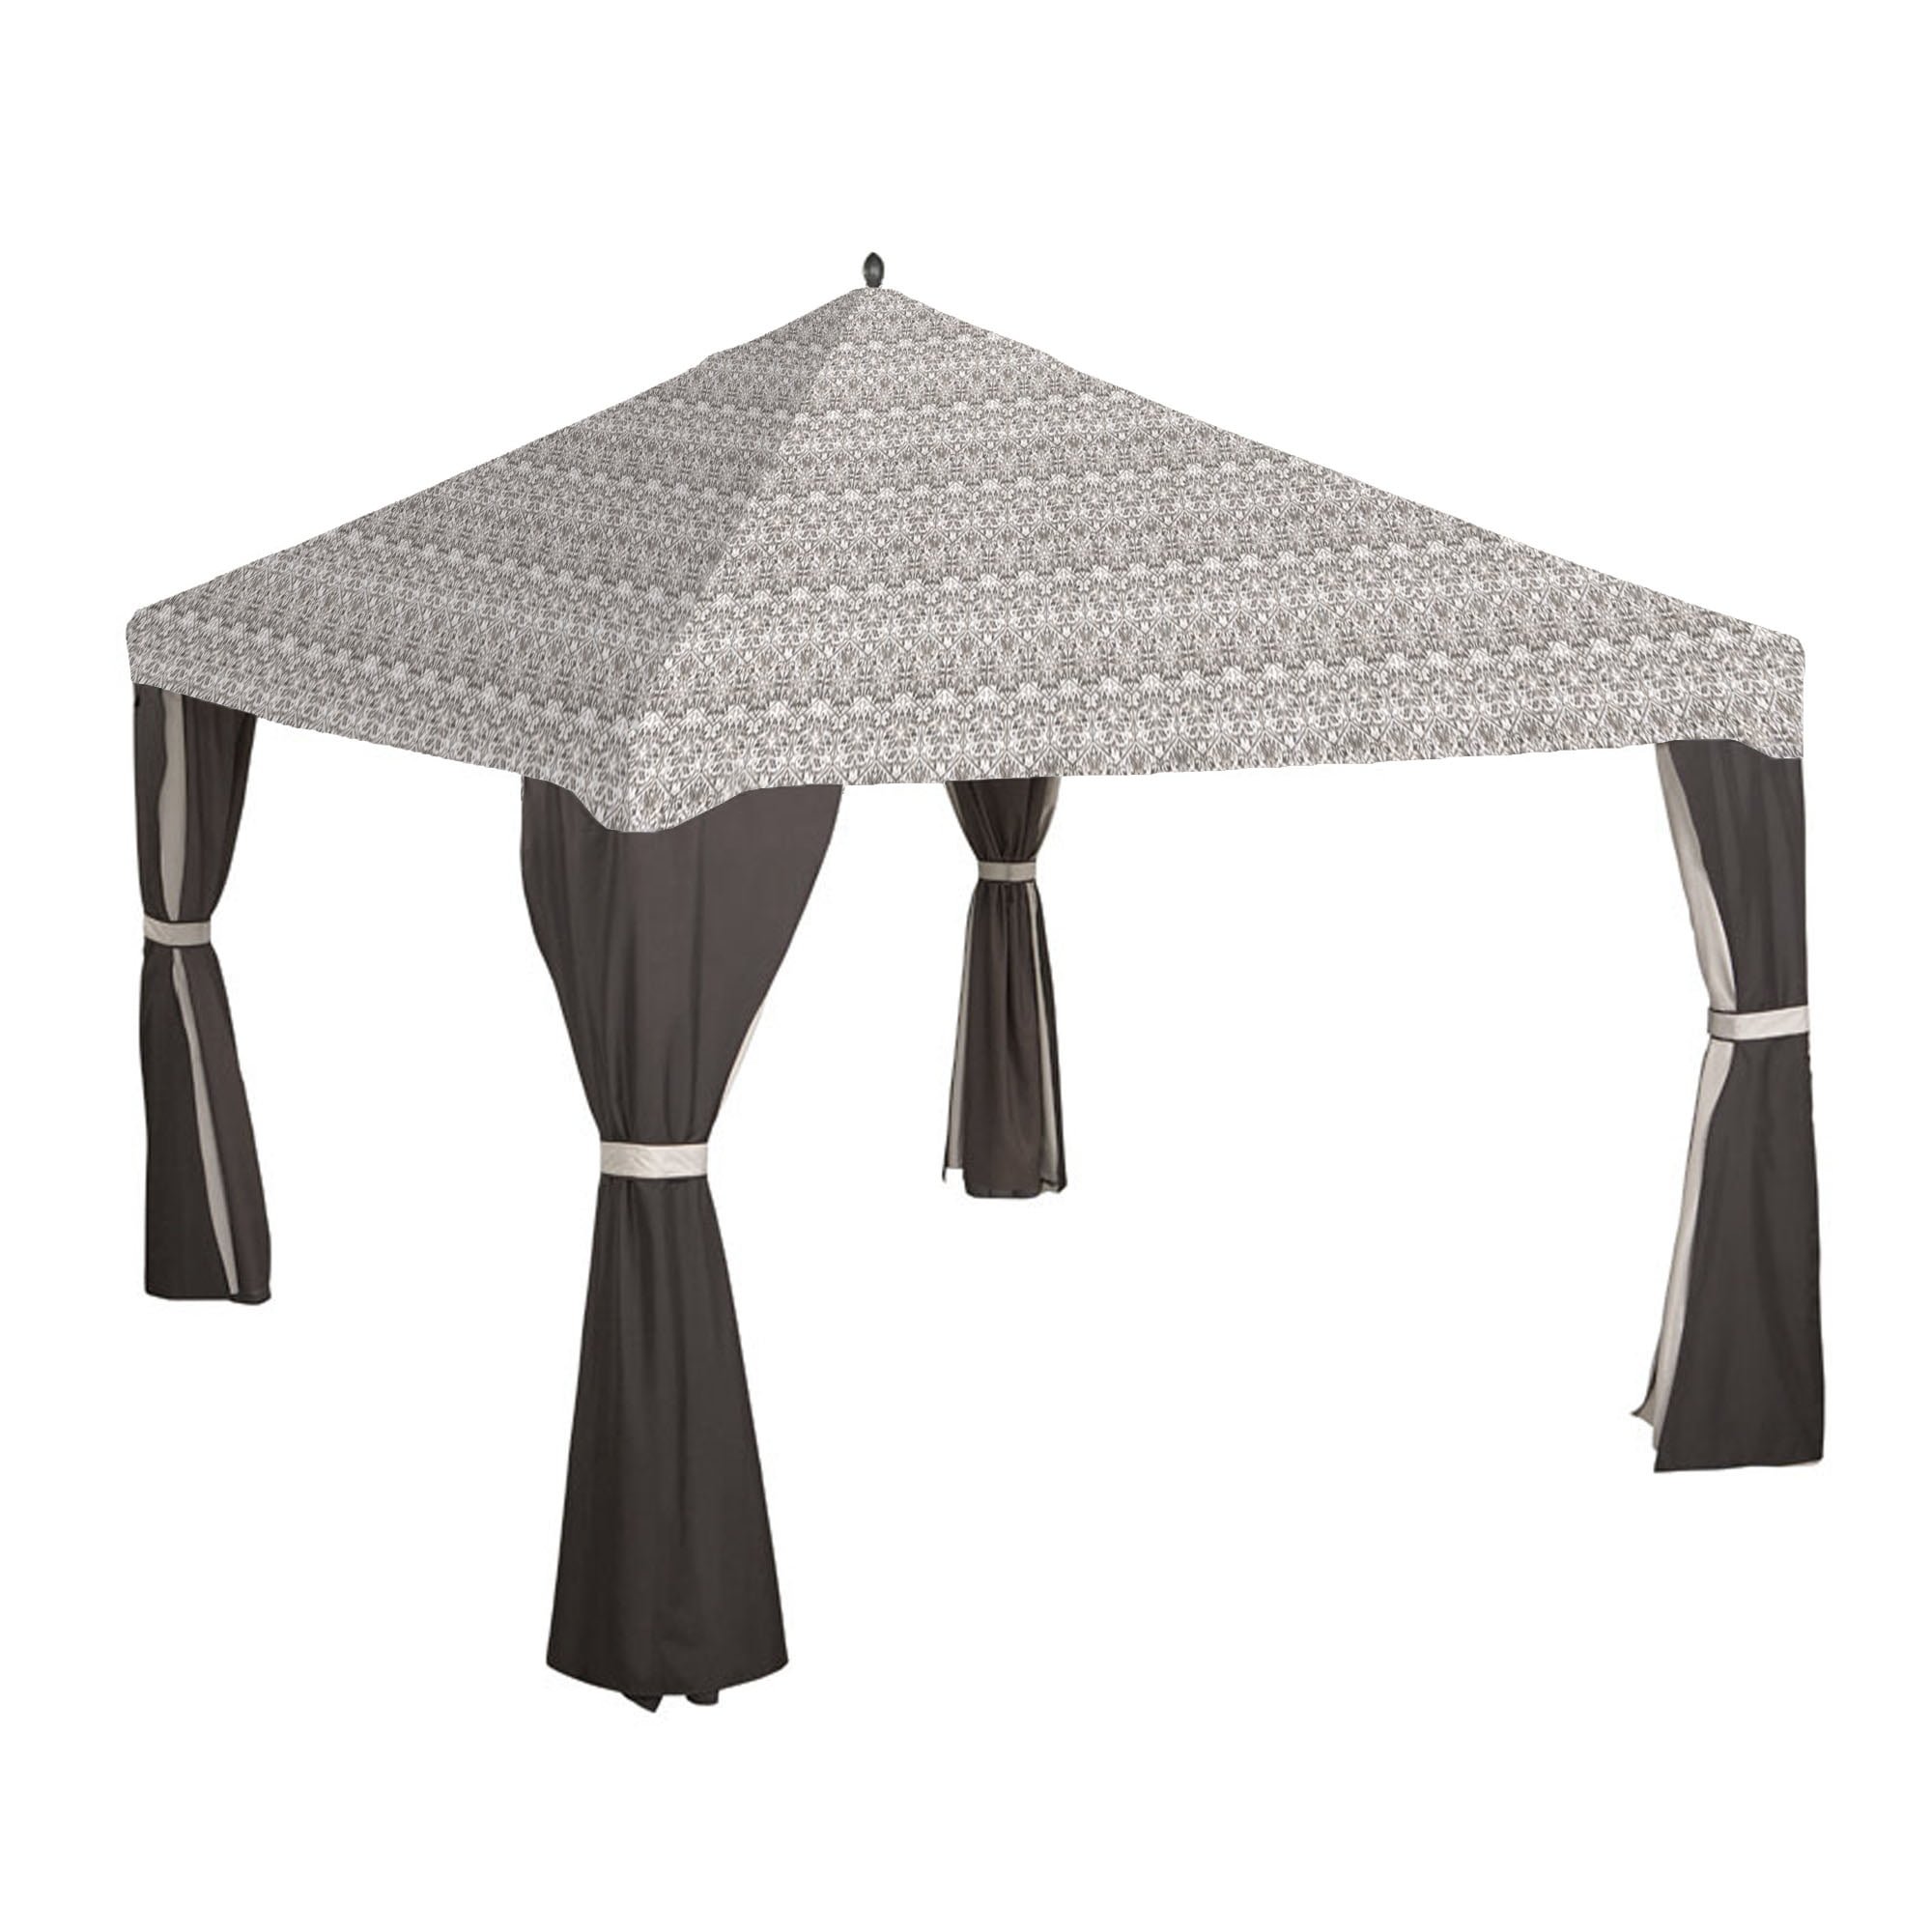 Garden Winds Replacement Canopy Top Cover For The Garden Treasures 10